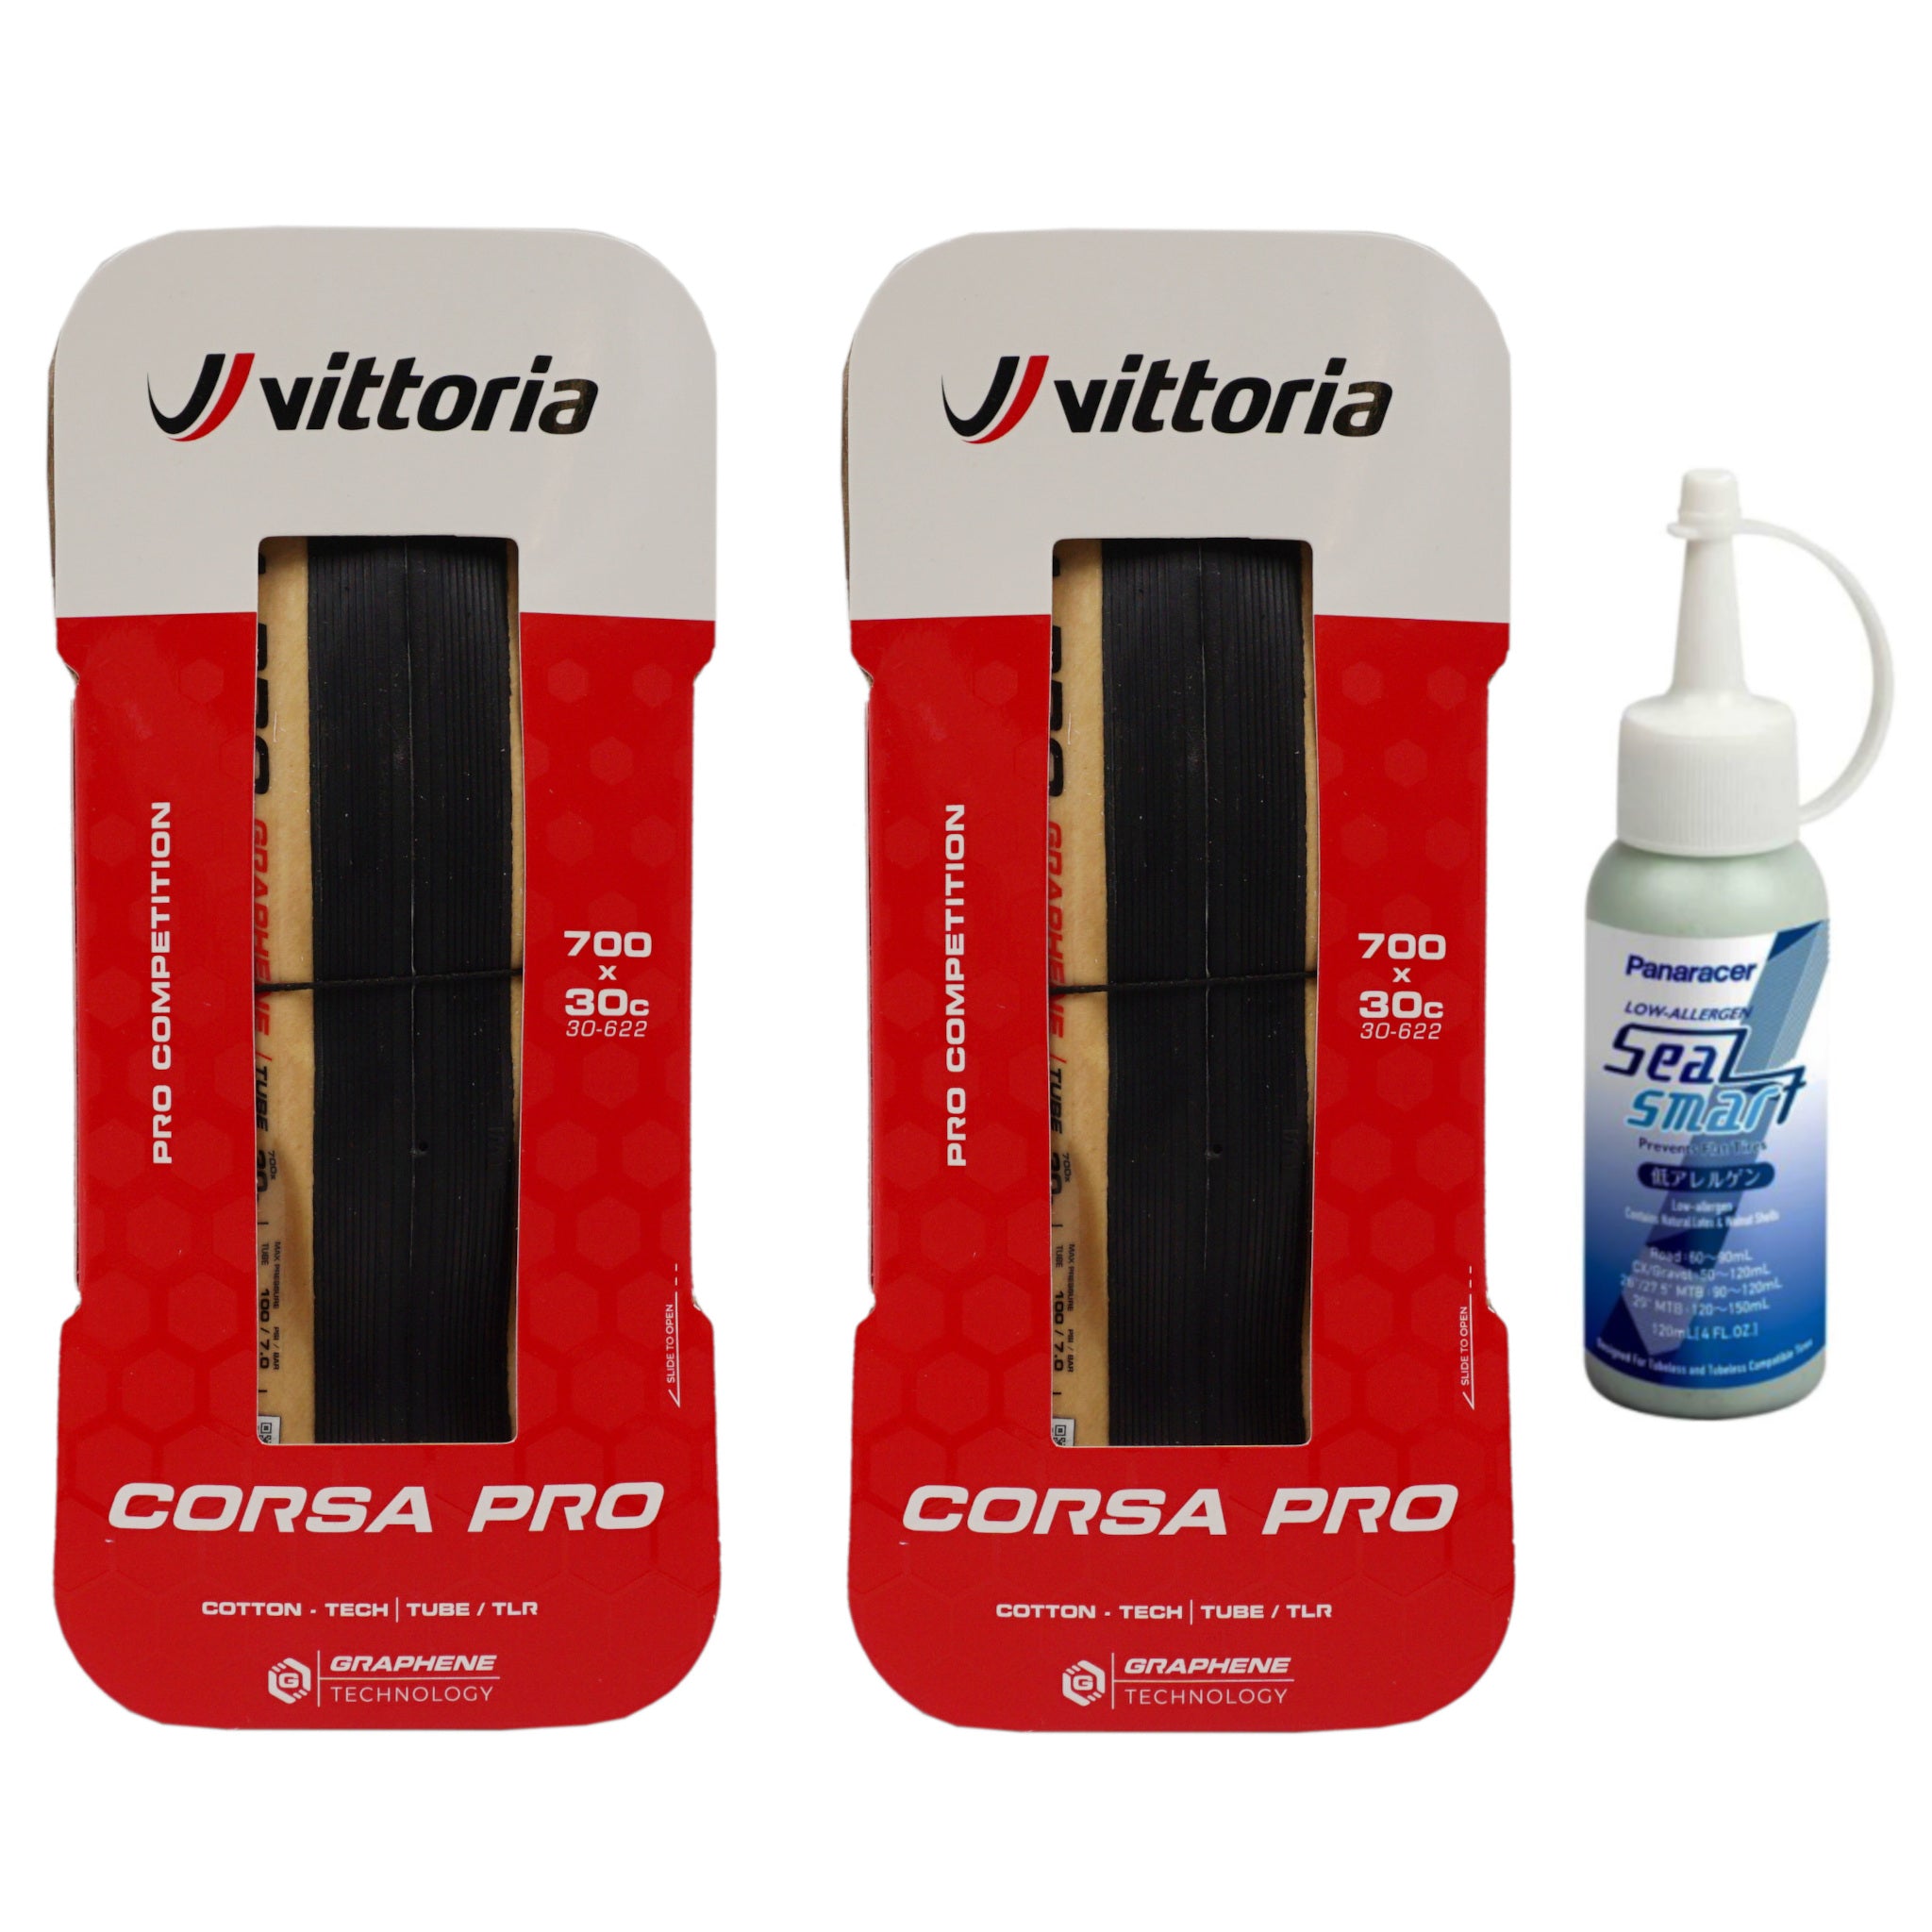 Vittoria Corsa Pro TLR 700c Tanwall Tubeless Tires - 2-Pack w-Free Sealant